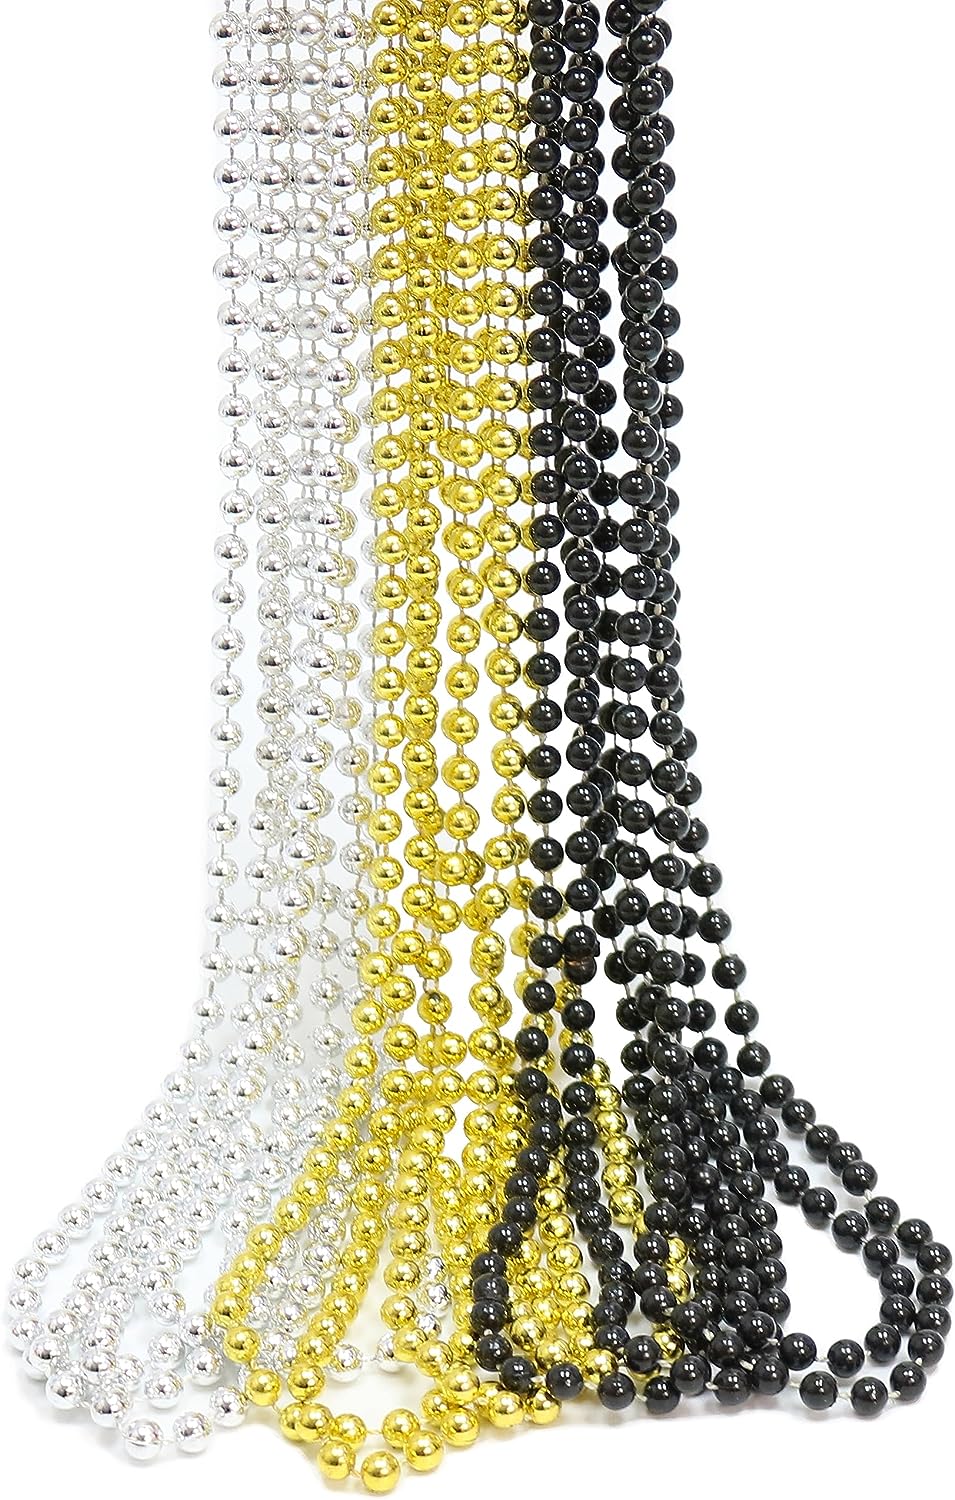 GIFTEXPRESS 12pcs Mardi Gras Beads Necklaces (Pack of 33)